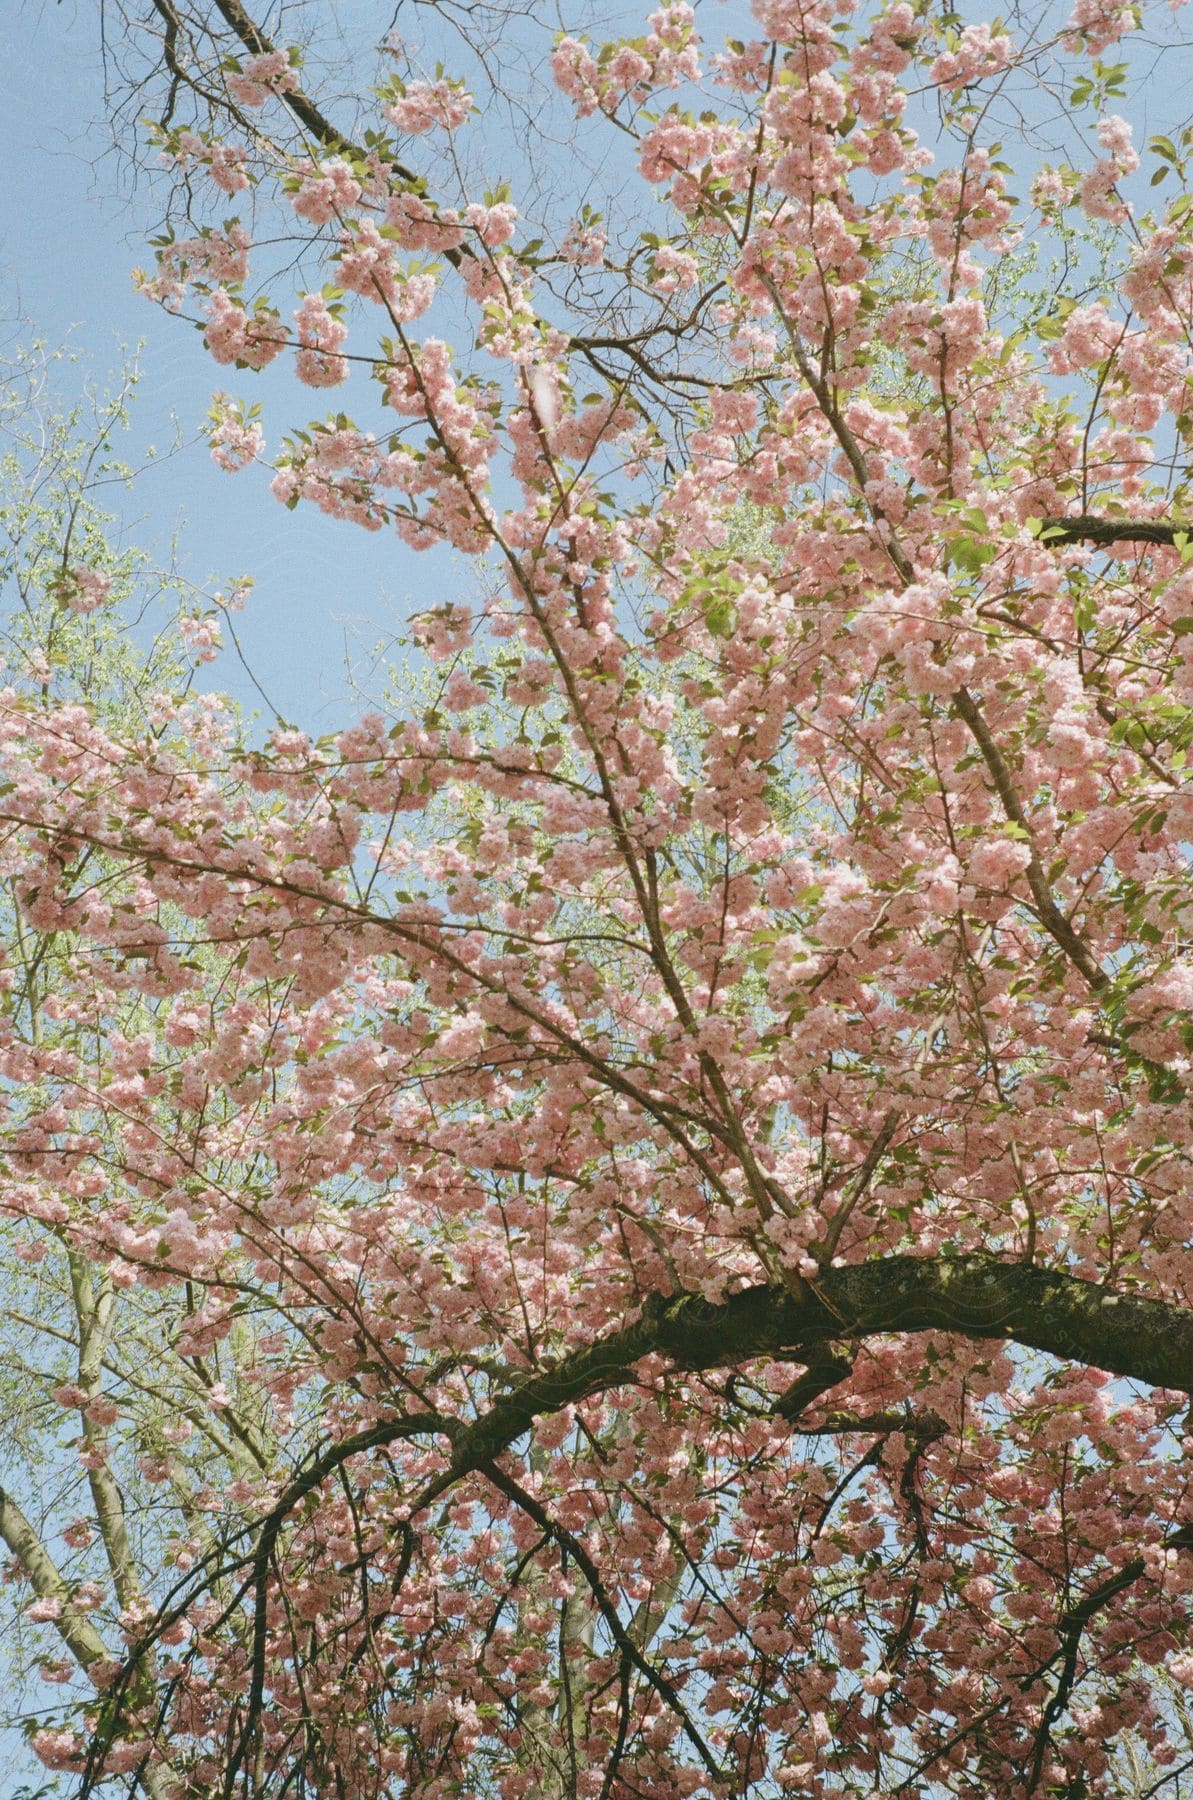 The vibrant springtime tree blossoms against the sky backdrop